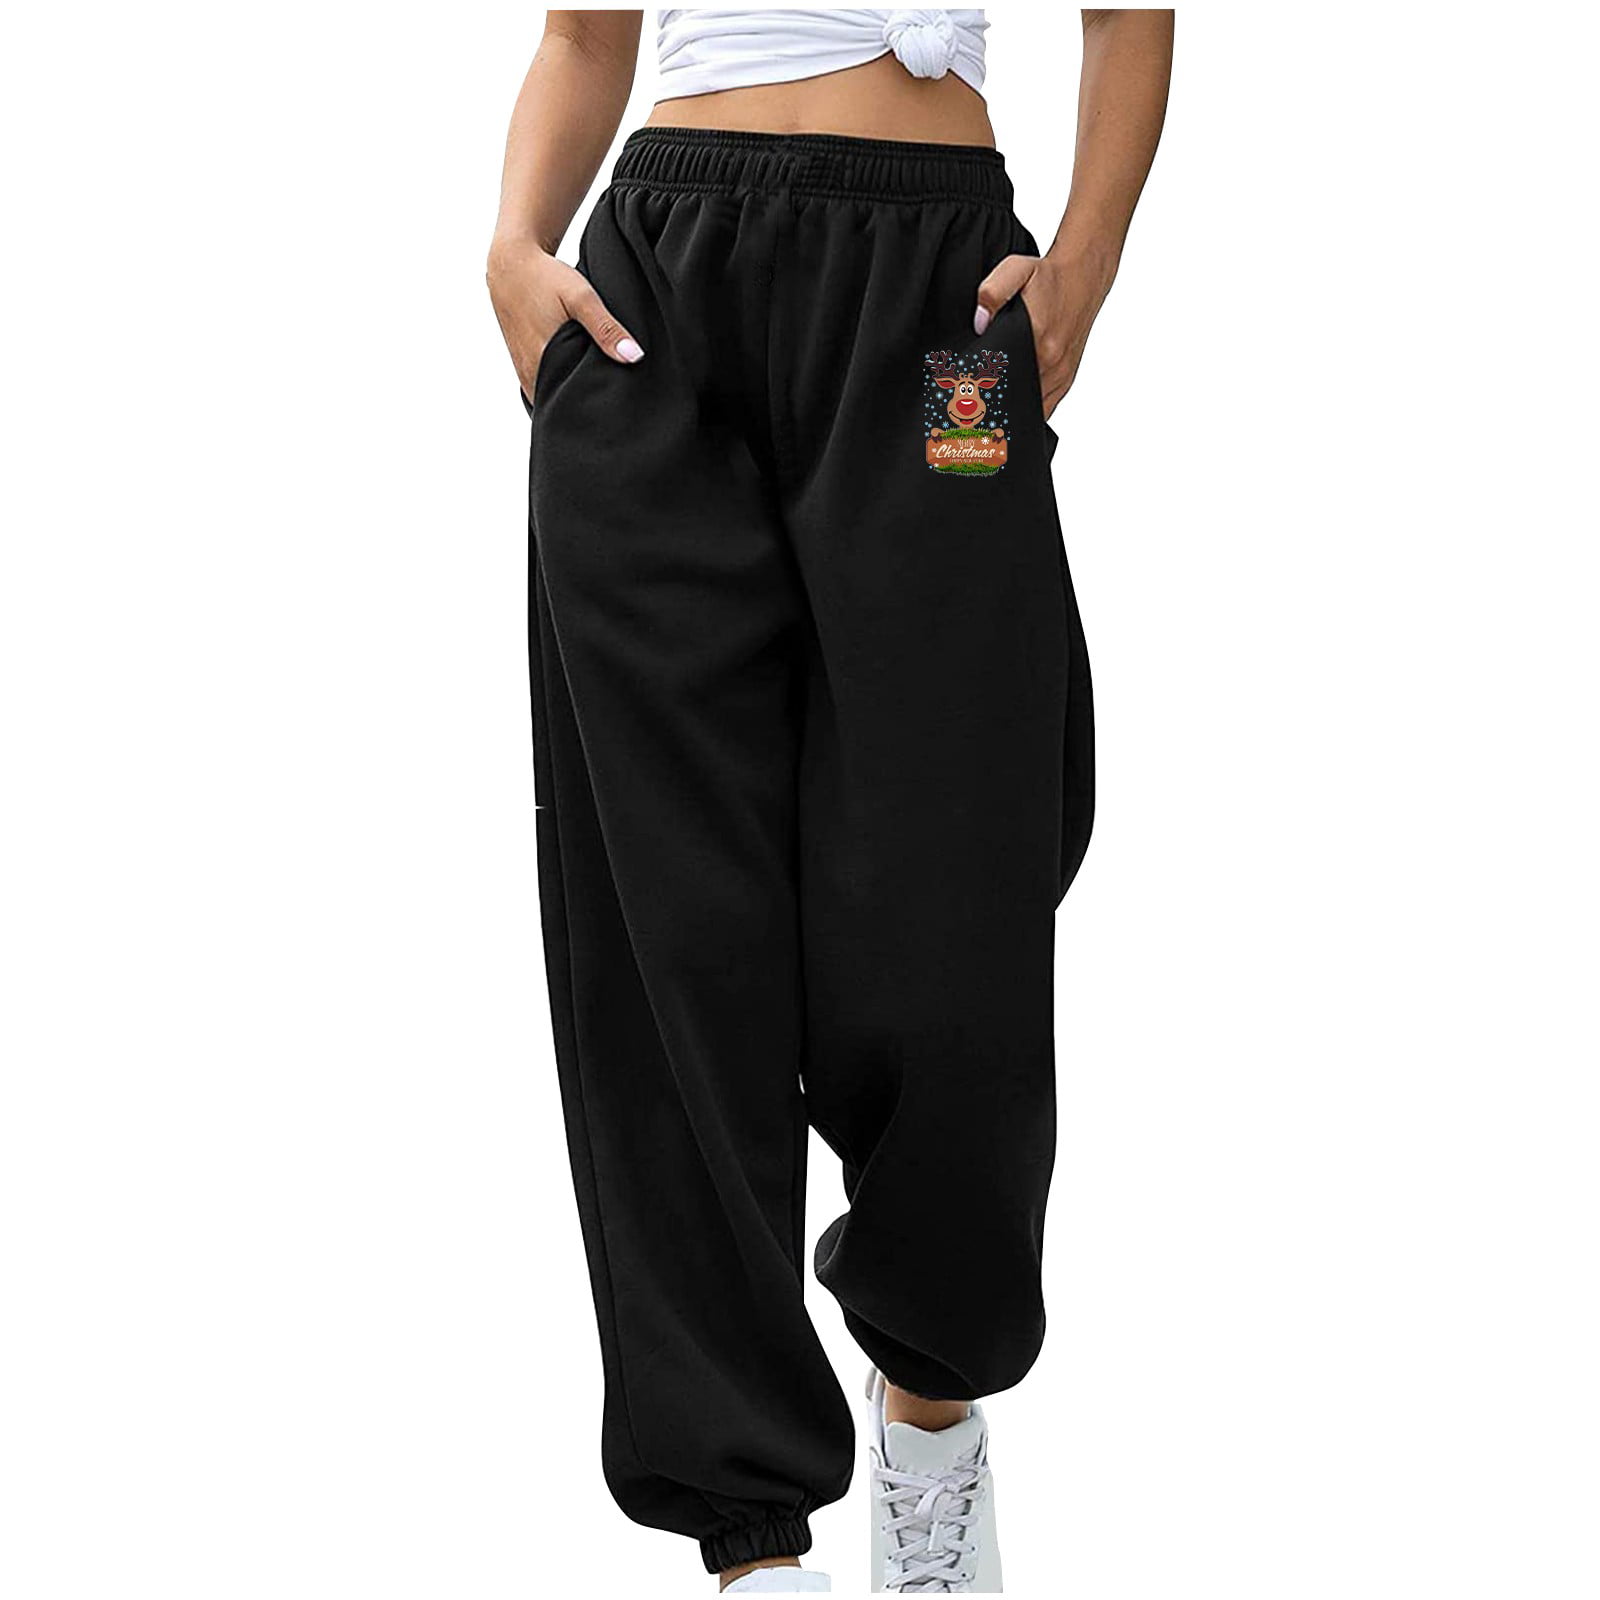 PEASKJP Sweat Pants For Womens,Women's Plus Size Premium Modal Rayon  Softest Ever Palazzo Solid Stretchy Knit Pants Made in USA with Premium  Fabric - Walmart.com